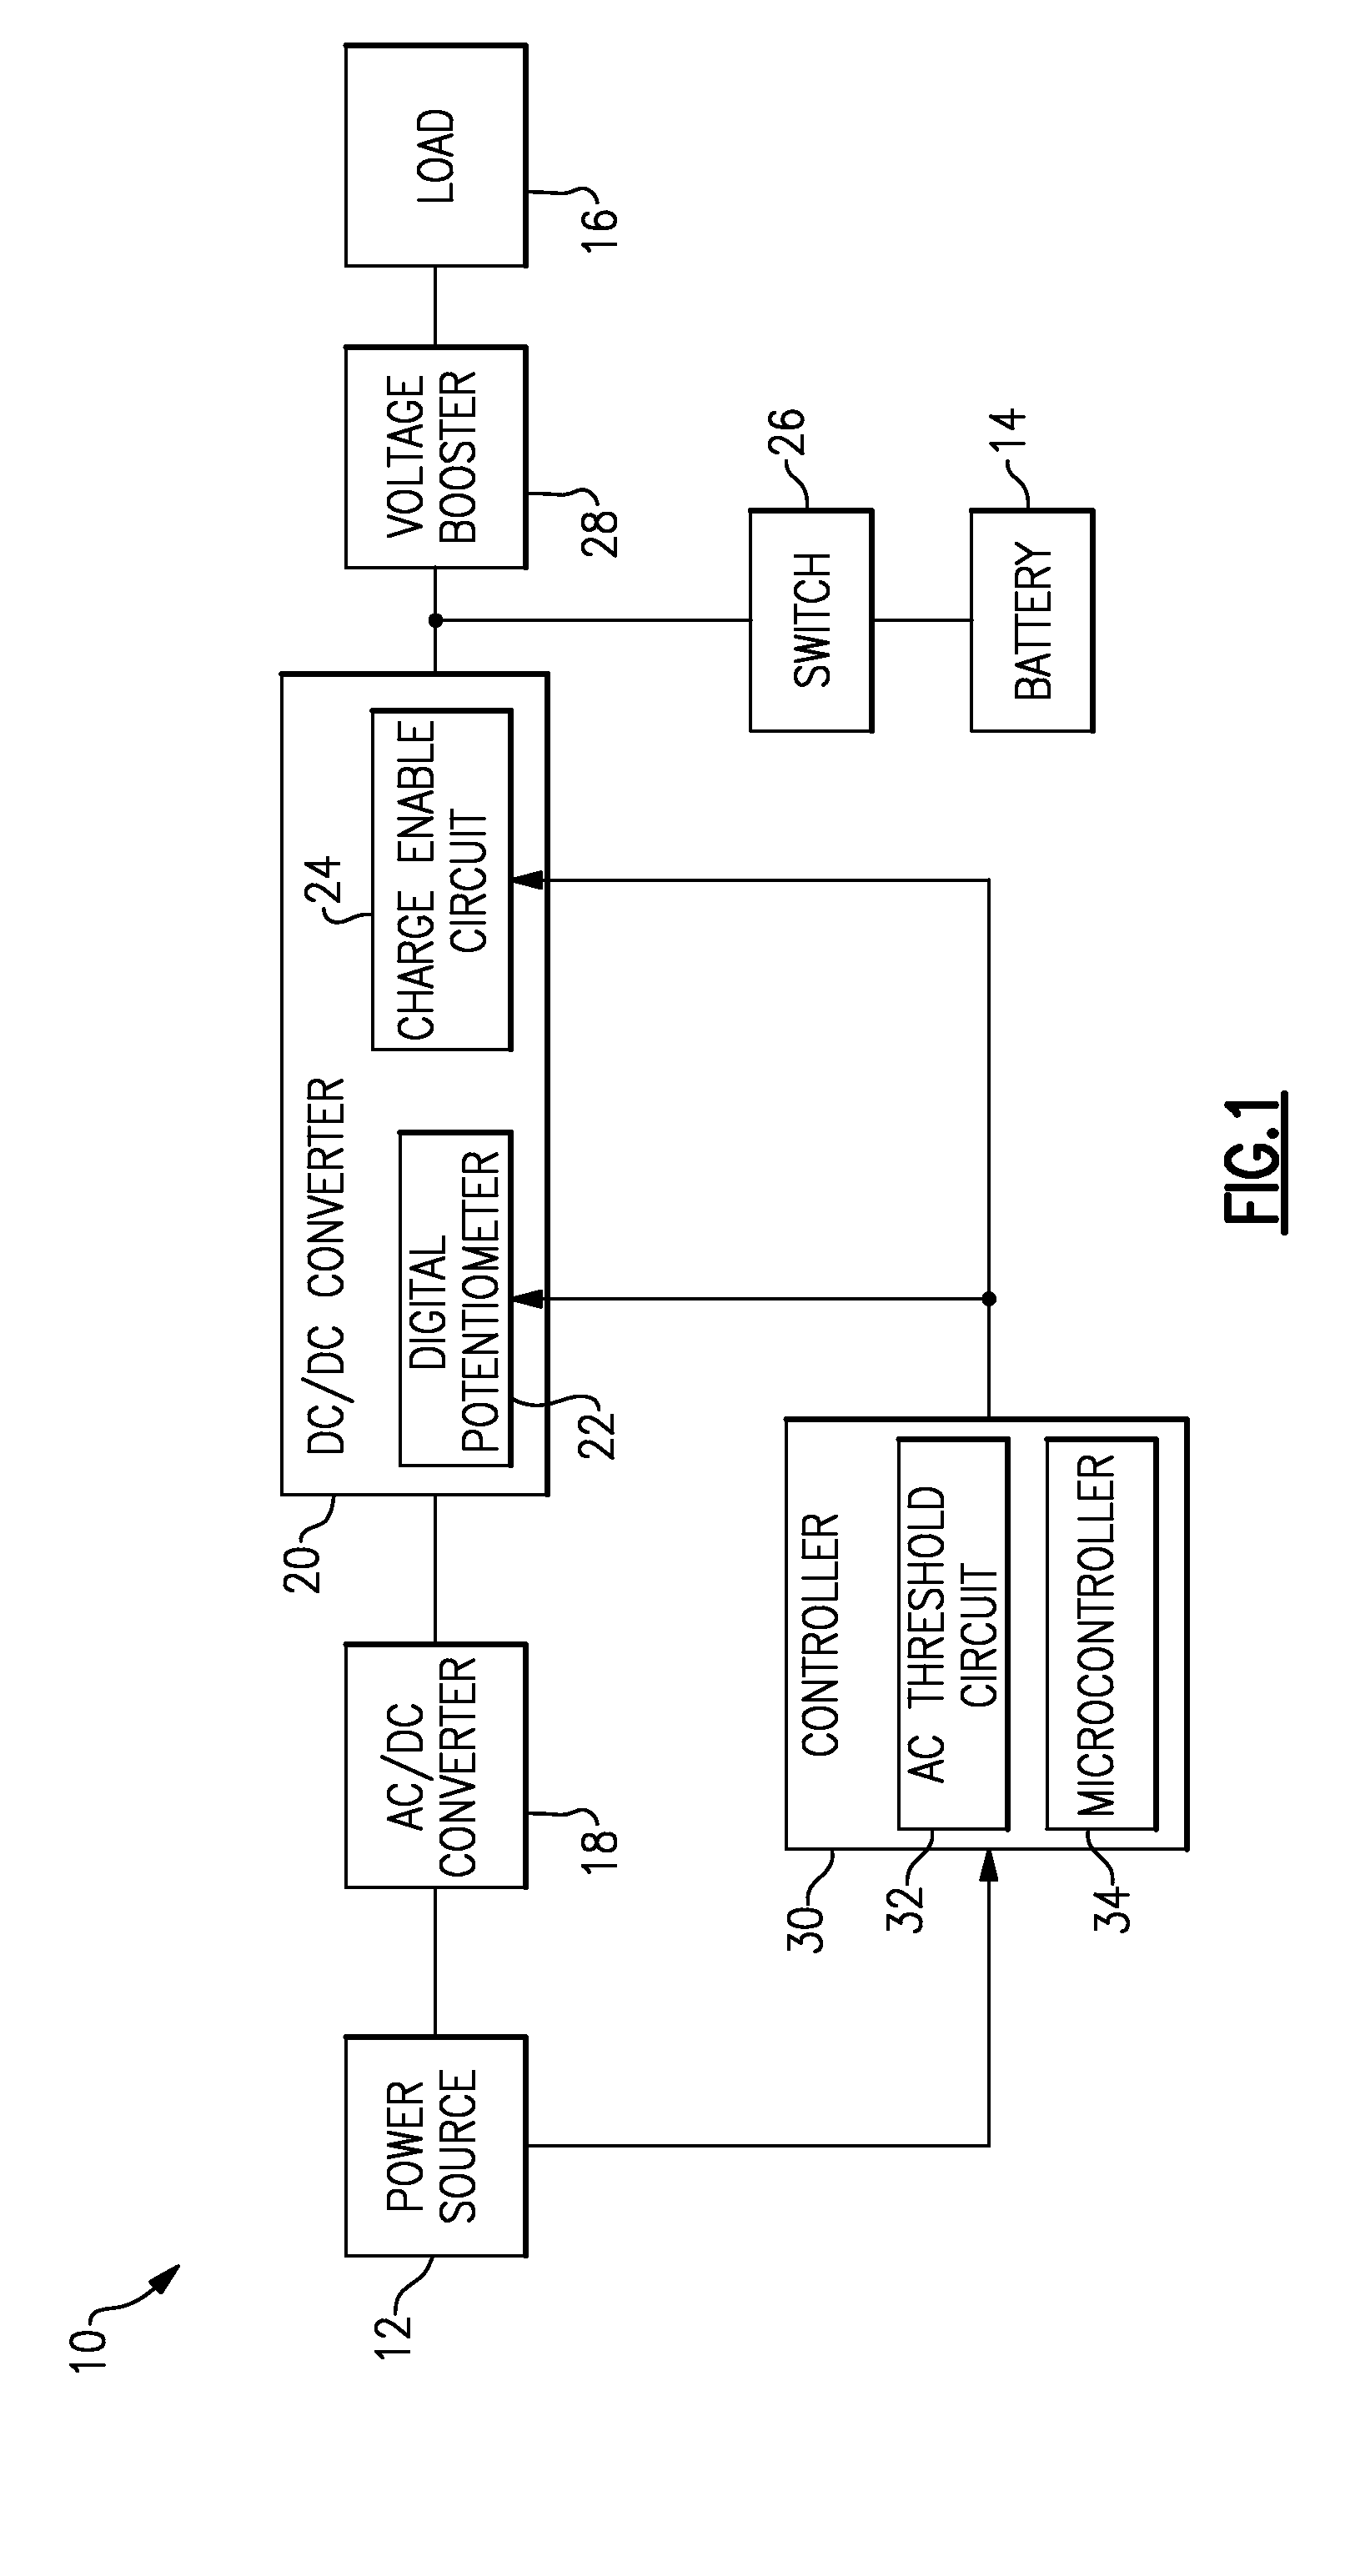 Control circuit operable to charge a battery at multiple charge rates